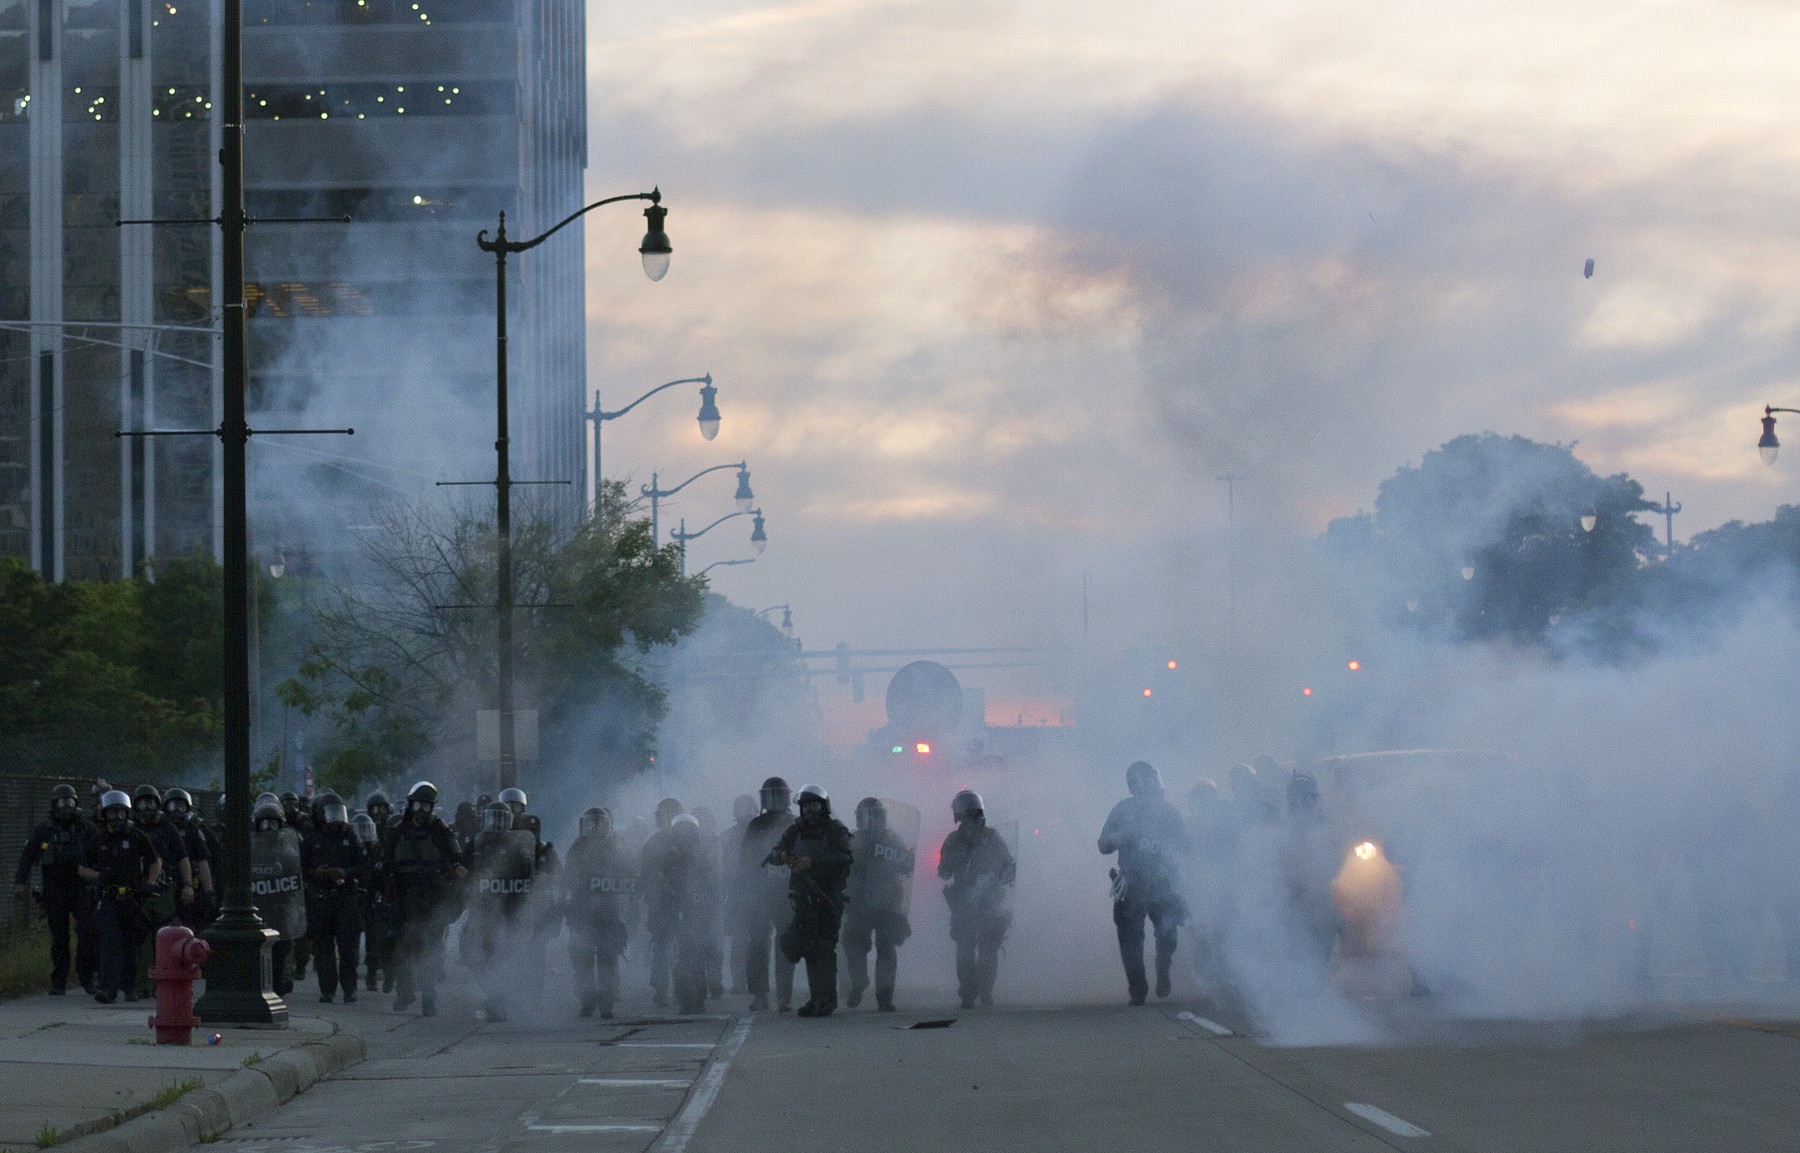 Detroit Police Turned Violent Firing Tear Gas And Flash Grenades Into